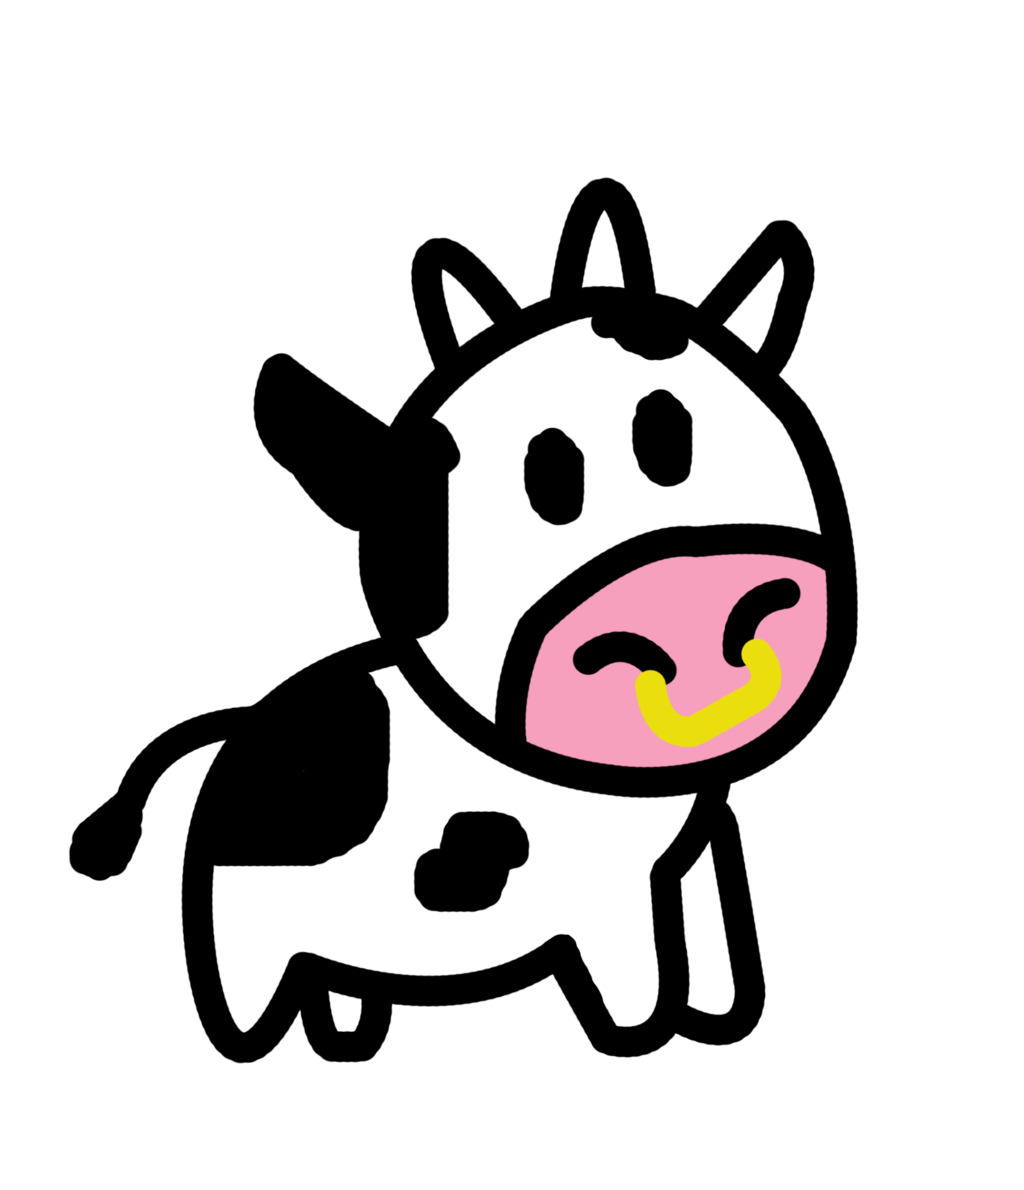 Cartoon Cows Pictures - Cliparts.co